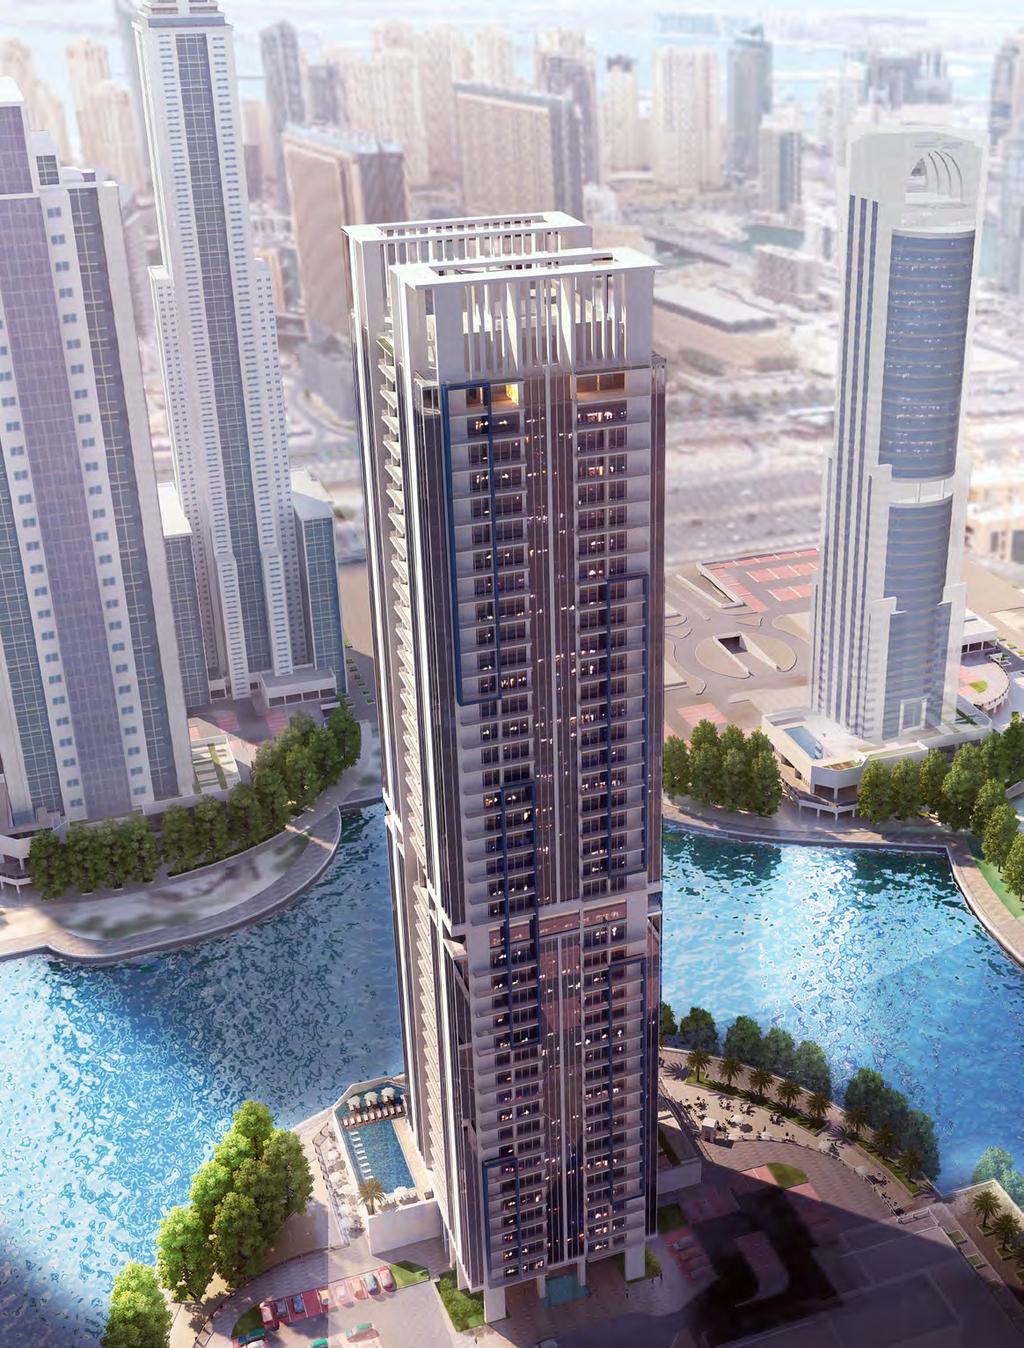 Situated in the heart of the new Dubai on Sheikh Zayed Road and between two